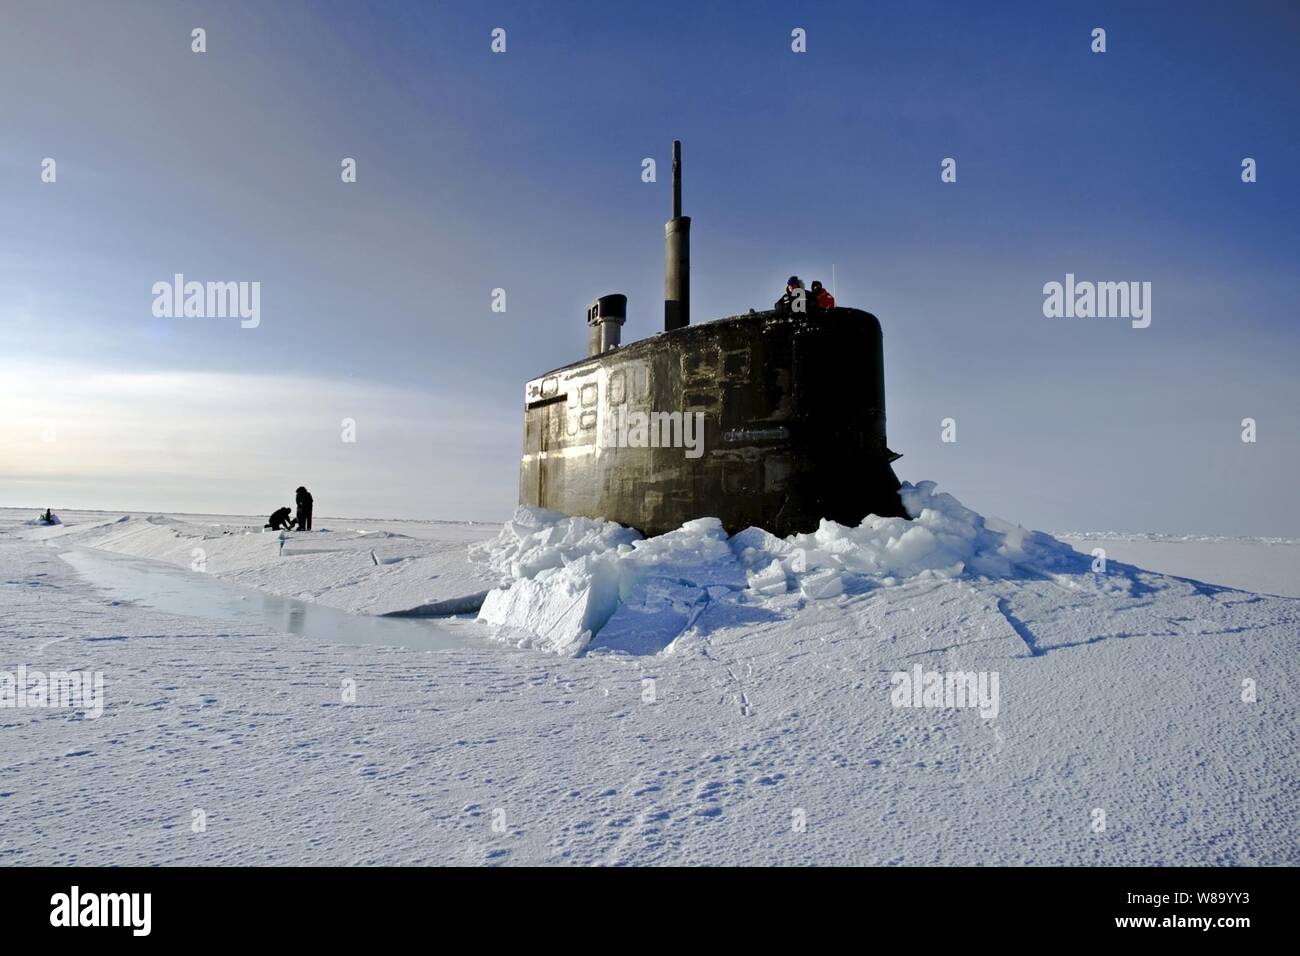 U.S. Navy sailors and members of the Applied Physics Laboratory Ice Station clear ice from the hatch of the USS Connecticut (SSN 22) as it surfaces above the ice in the Arctic Ocean on March 19, 2011.  The submarine and crew are participating in Ice Exercise 2011, which tests submarine operations in the Arctic. Stock Photo